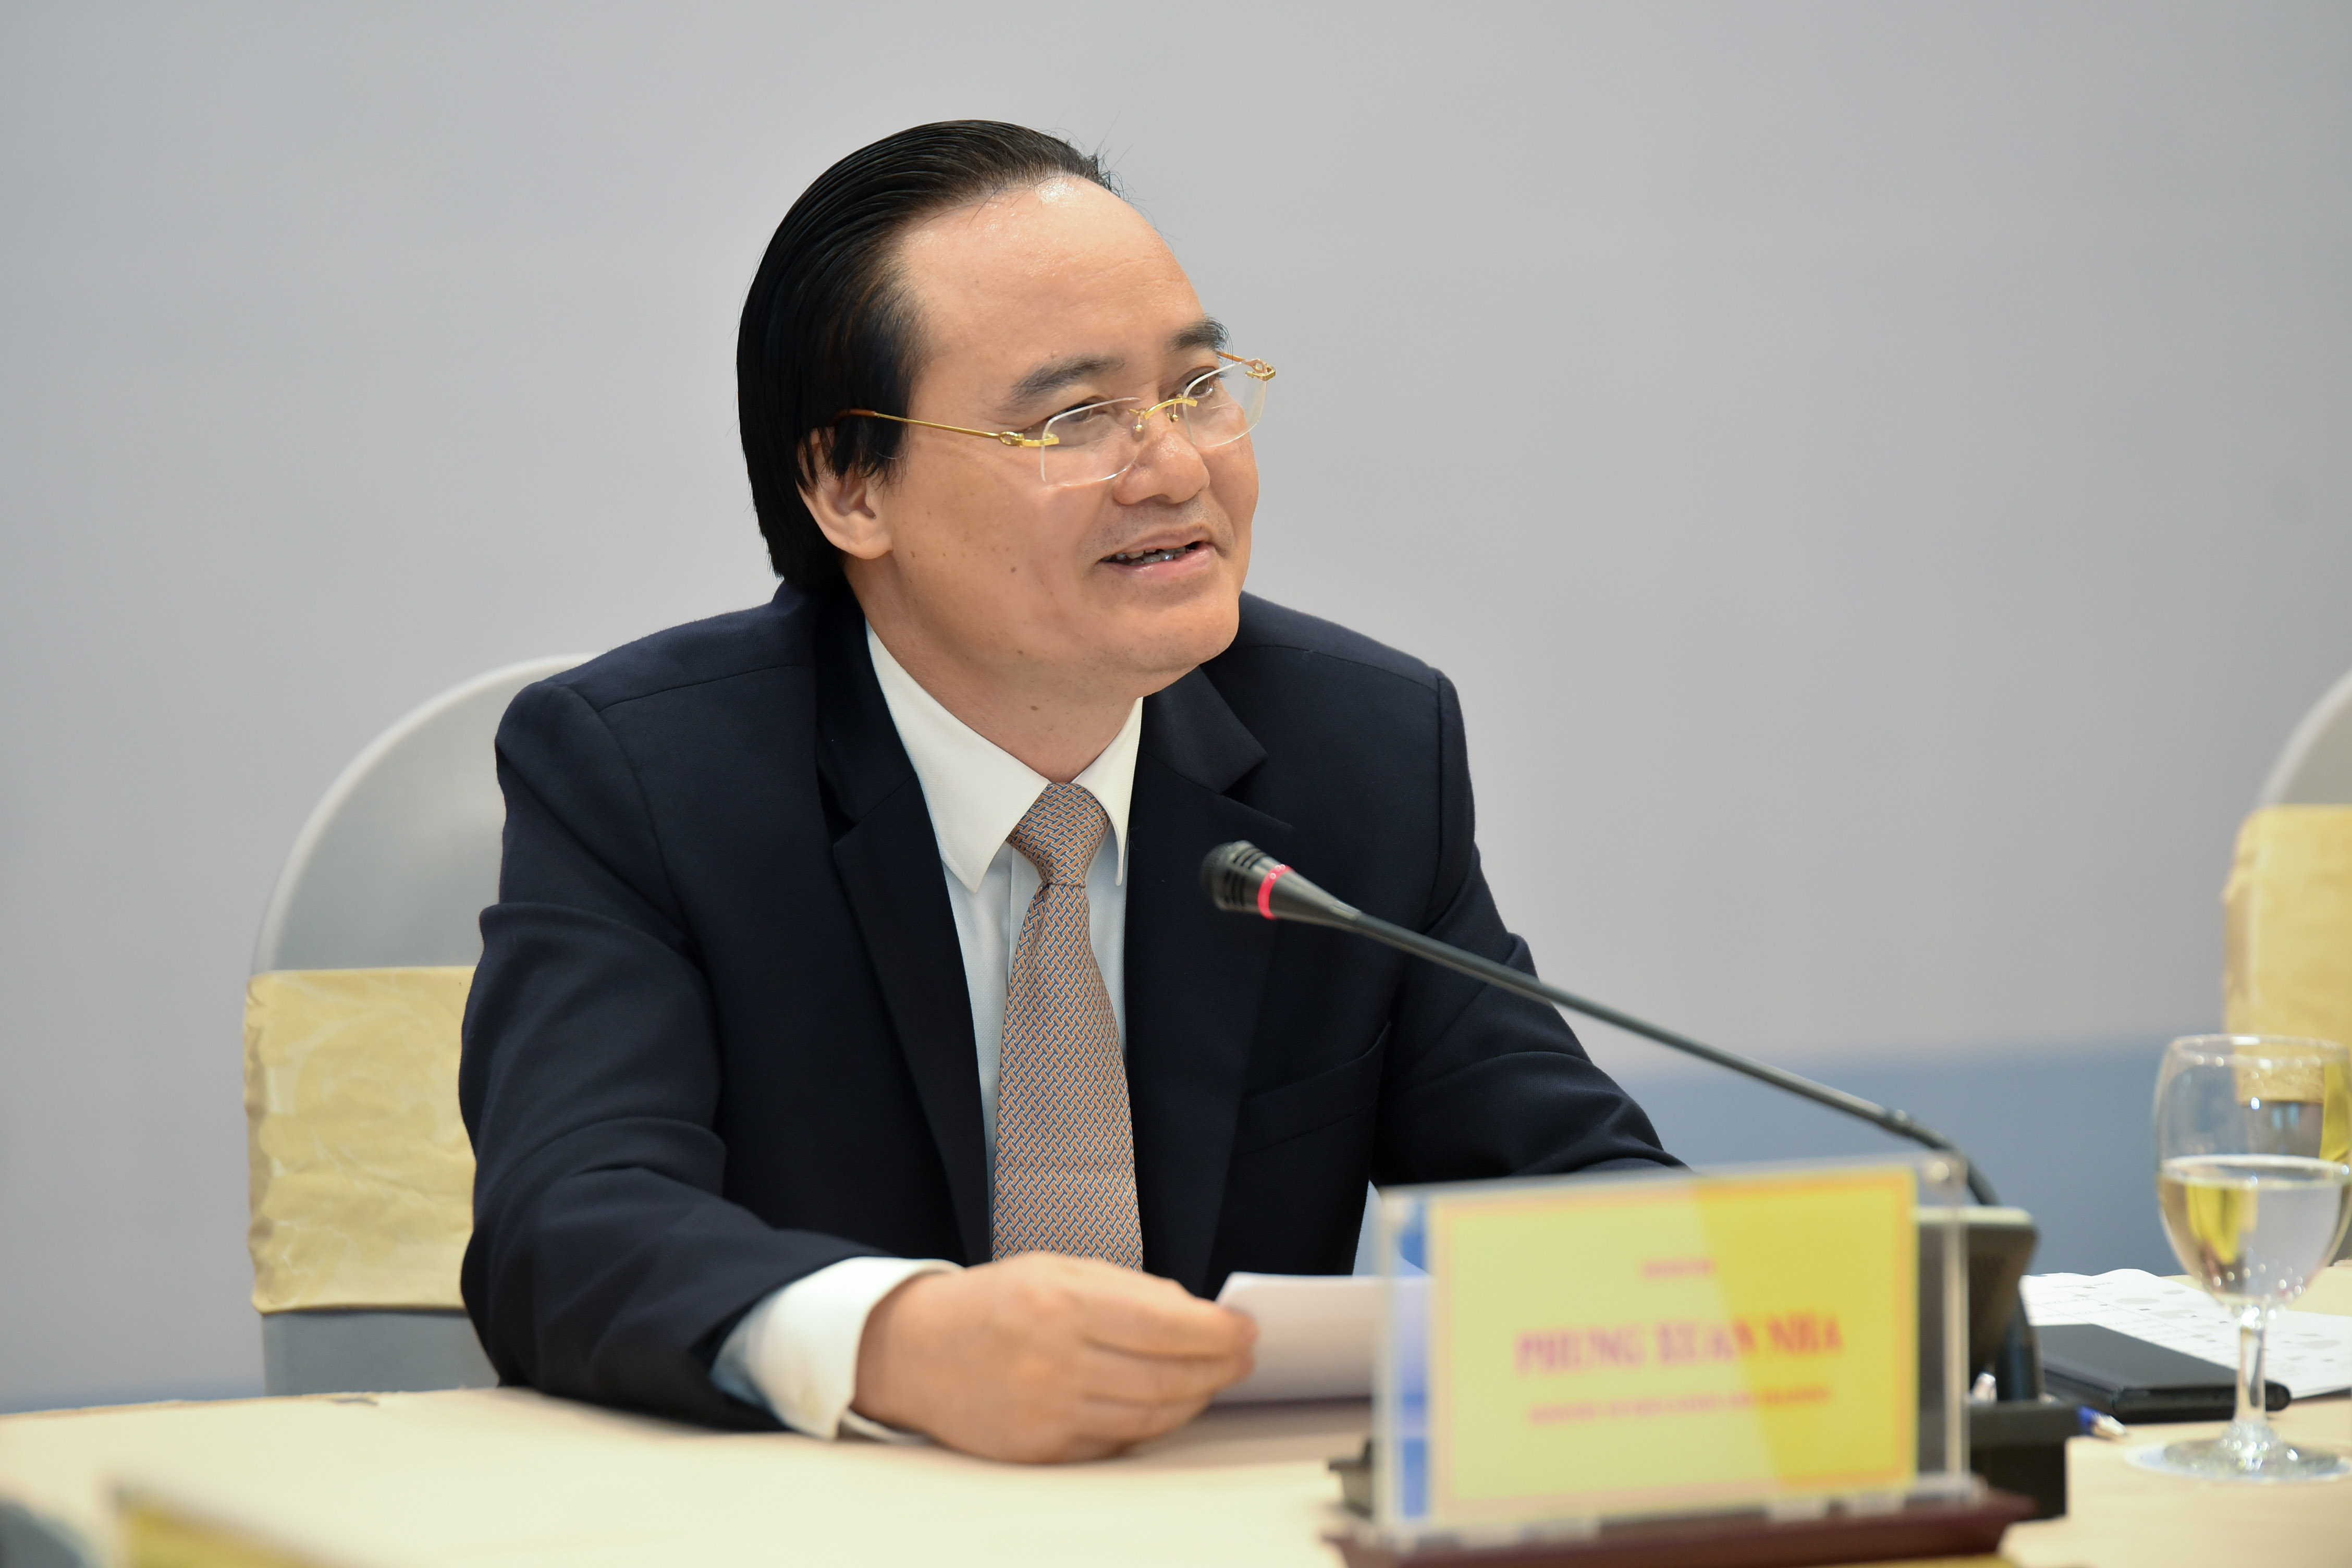 Minister of Education and Training Phung Xuan Nha spoke at the roundtable.